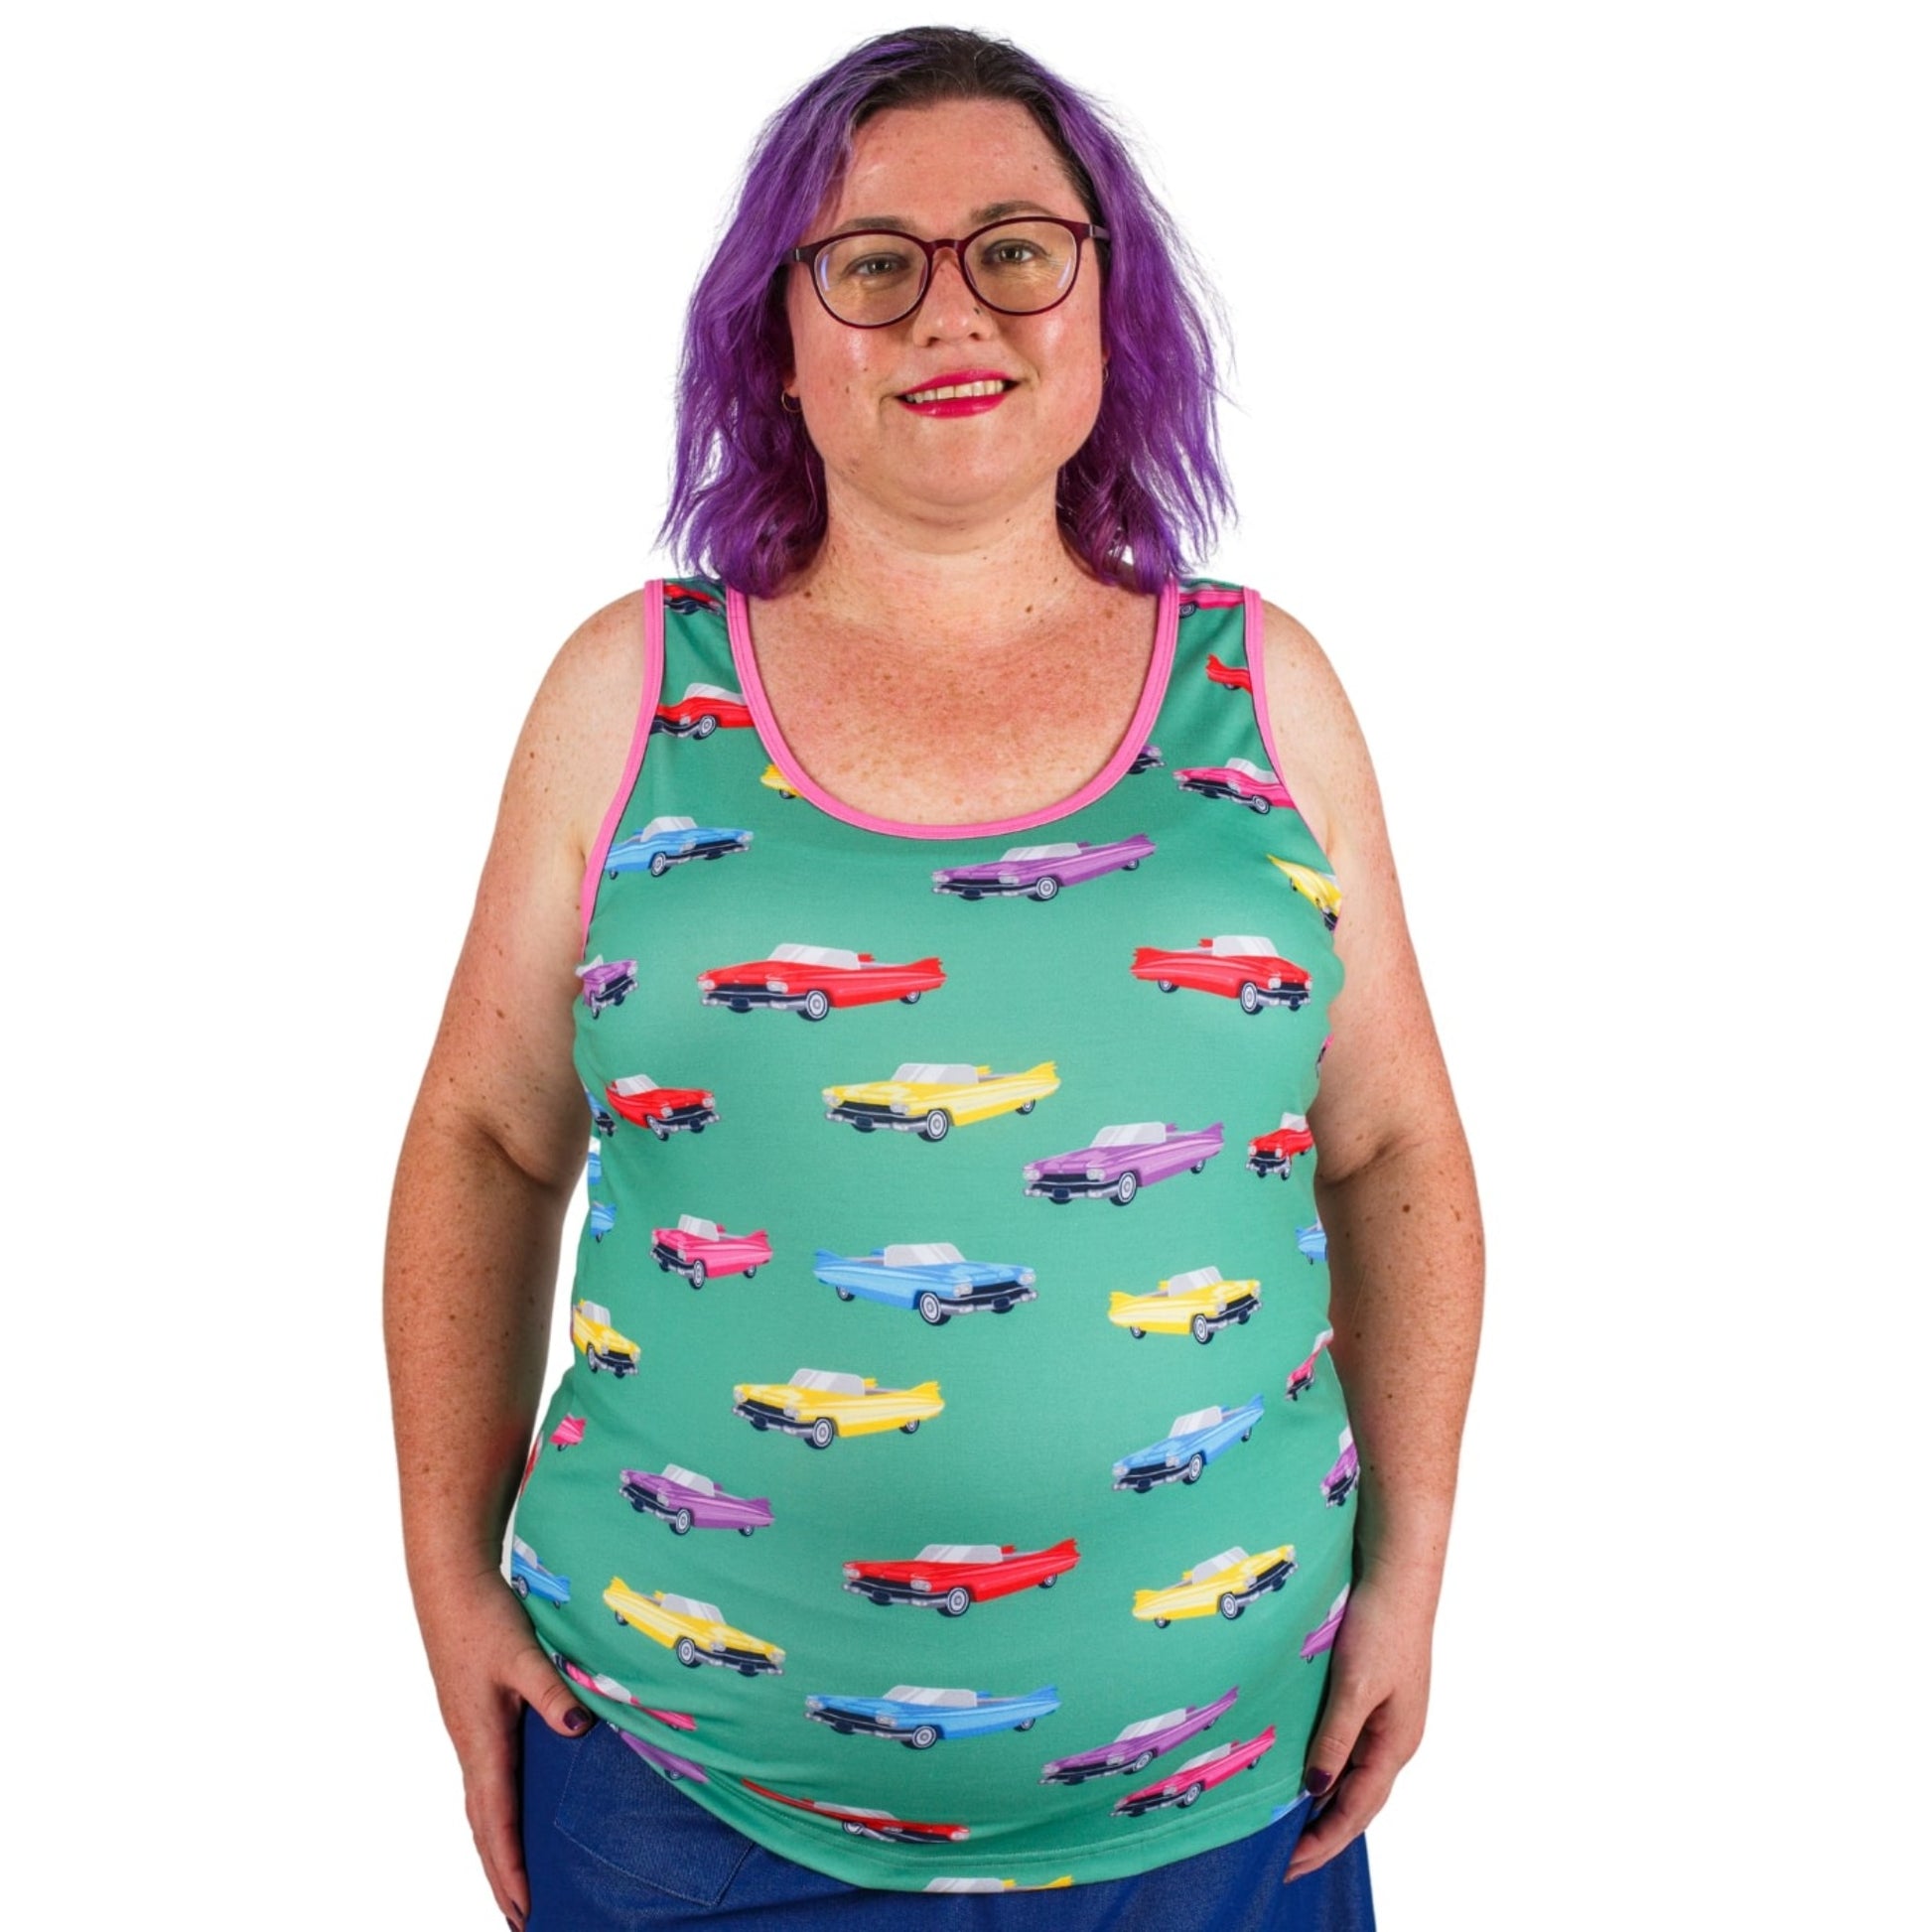 Cadillac Singlet Top by RainbowsAndFairies.com.au (Vintage Car - Antique - Tank Top - Shirt - Vintage Inspired - Pink Cadillac - Kitsch) - SKU: CL_SGLET_CADIL_ORG - Pic-05